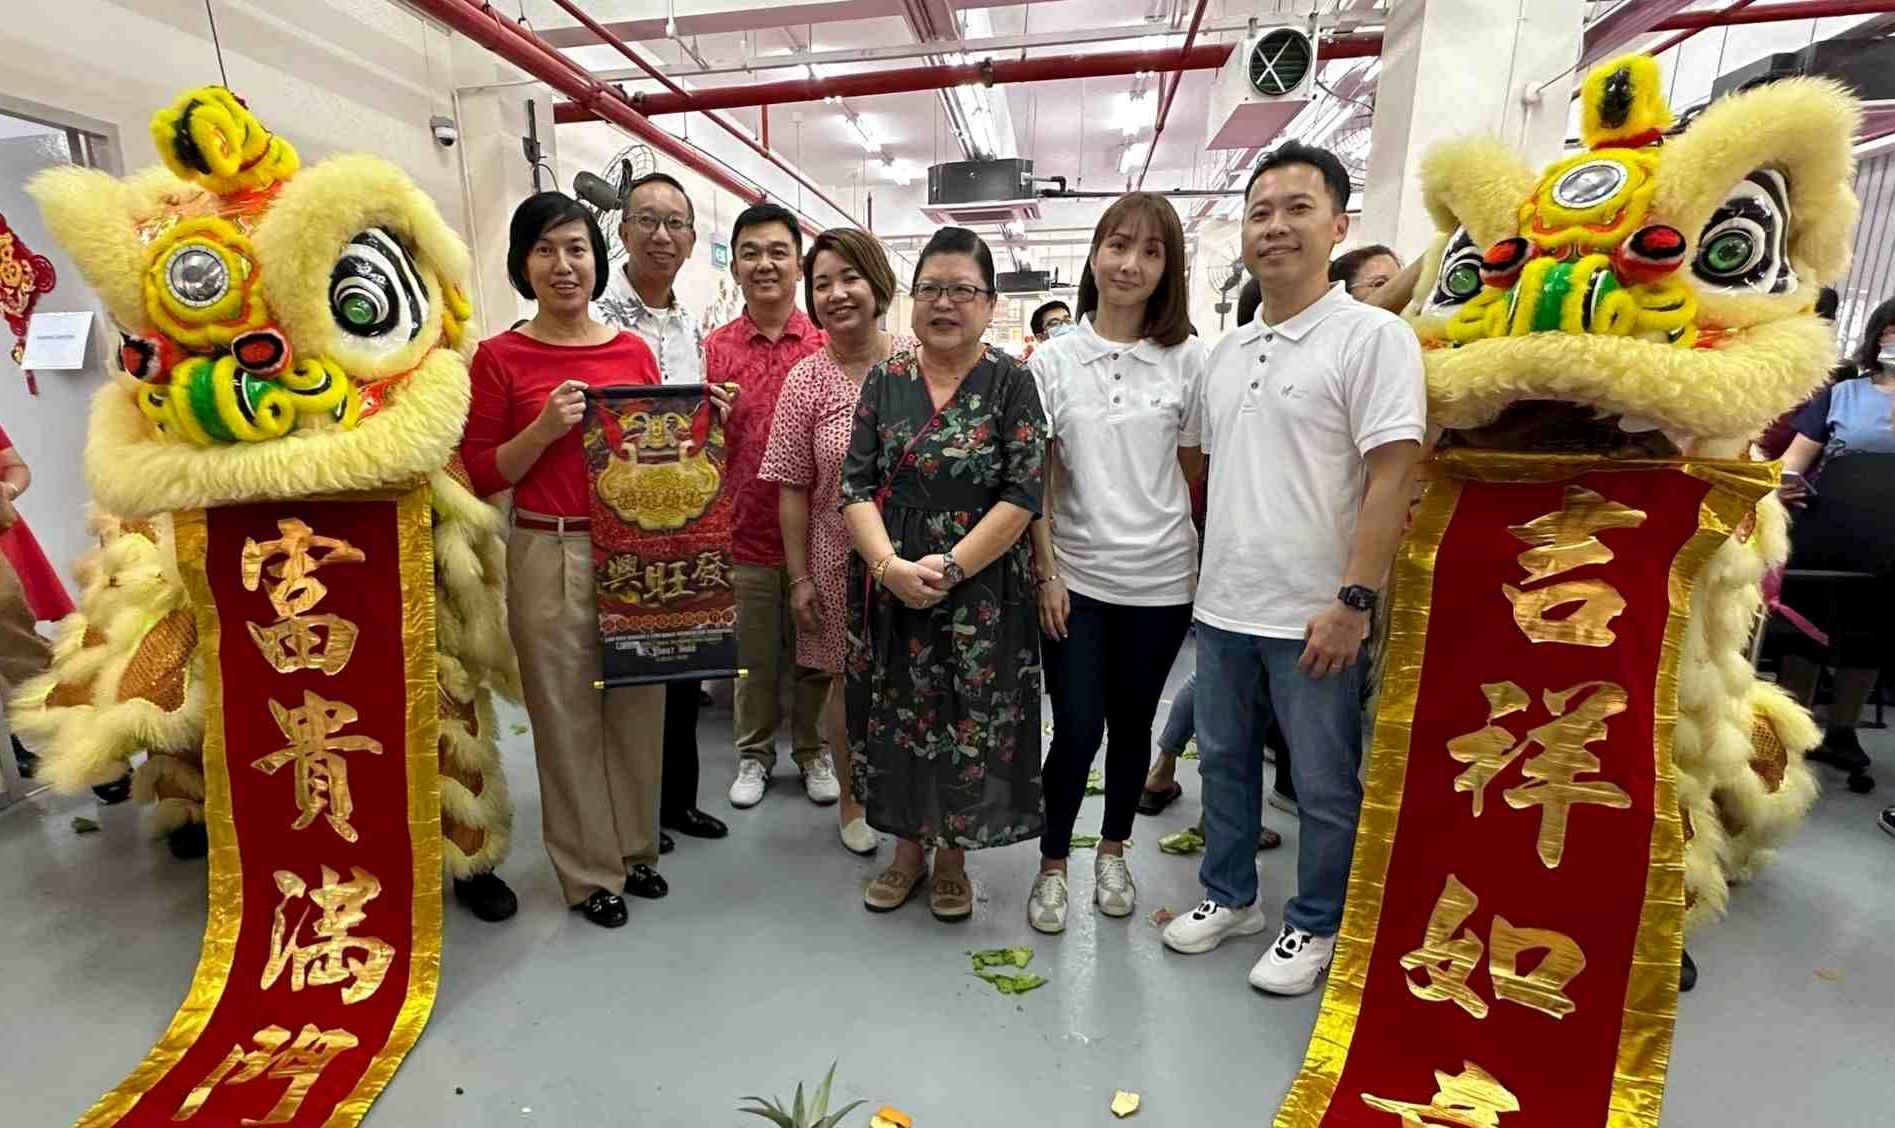 An group photo of Bizlink department heads with our director, Caring Skin staff and lions displaying auspicious words 